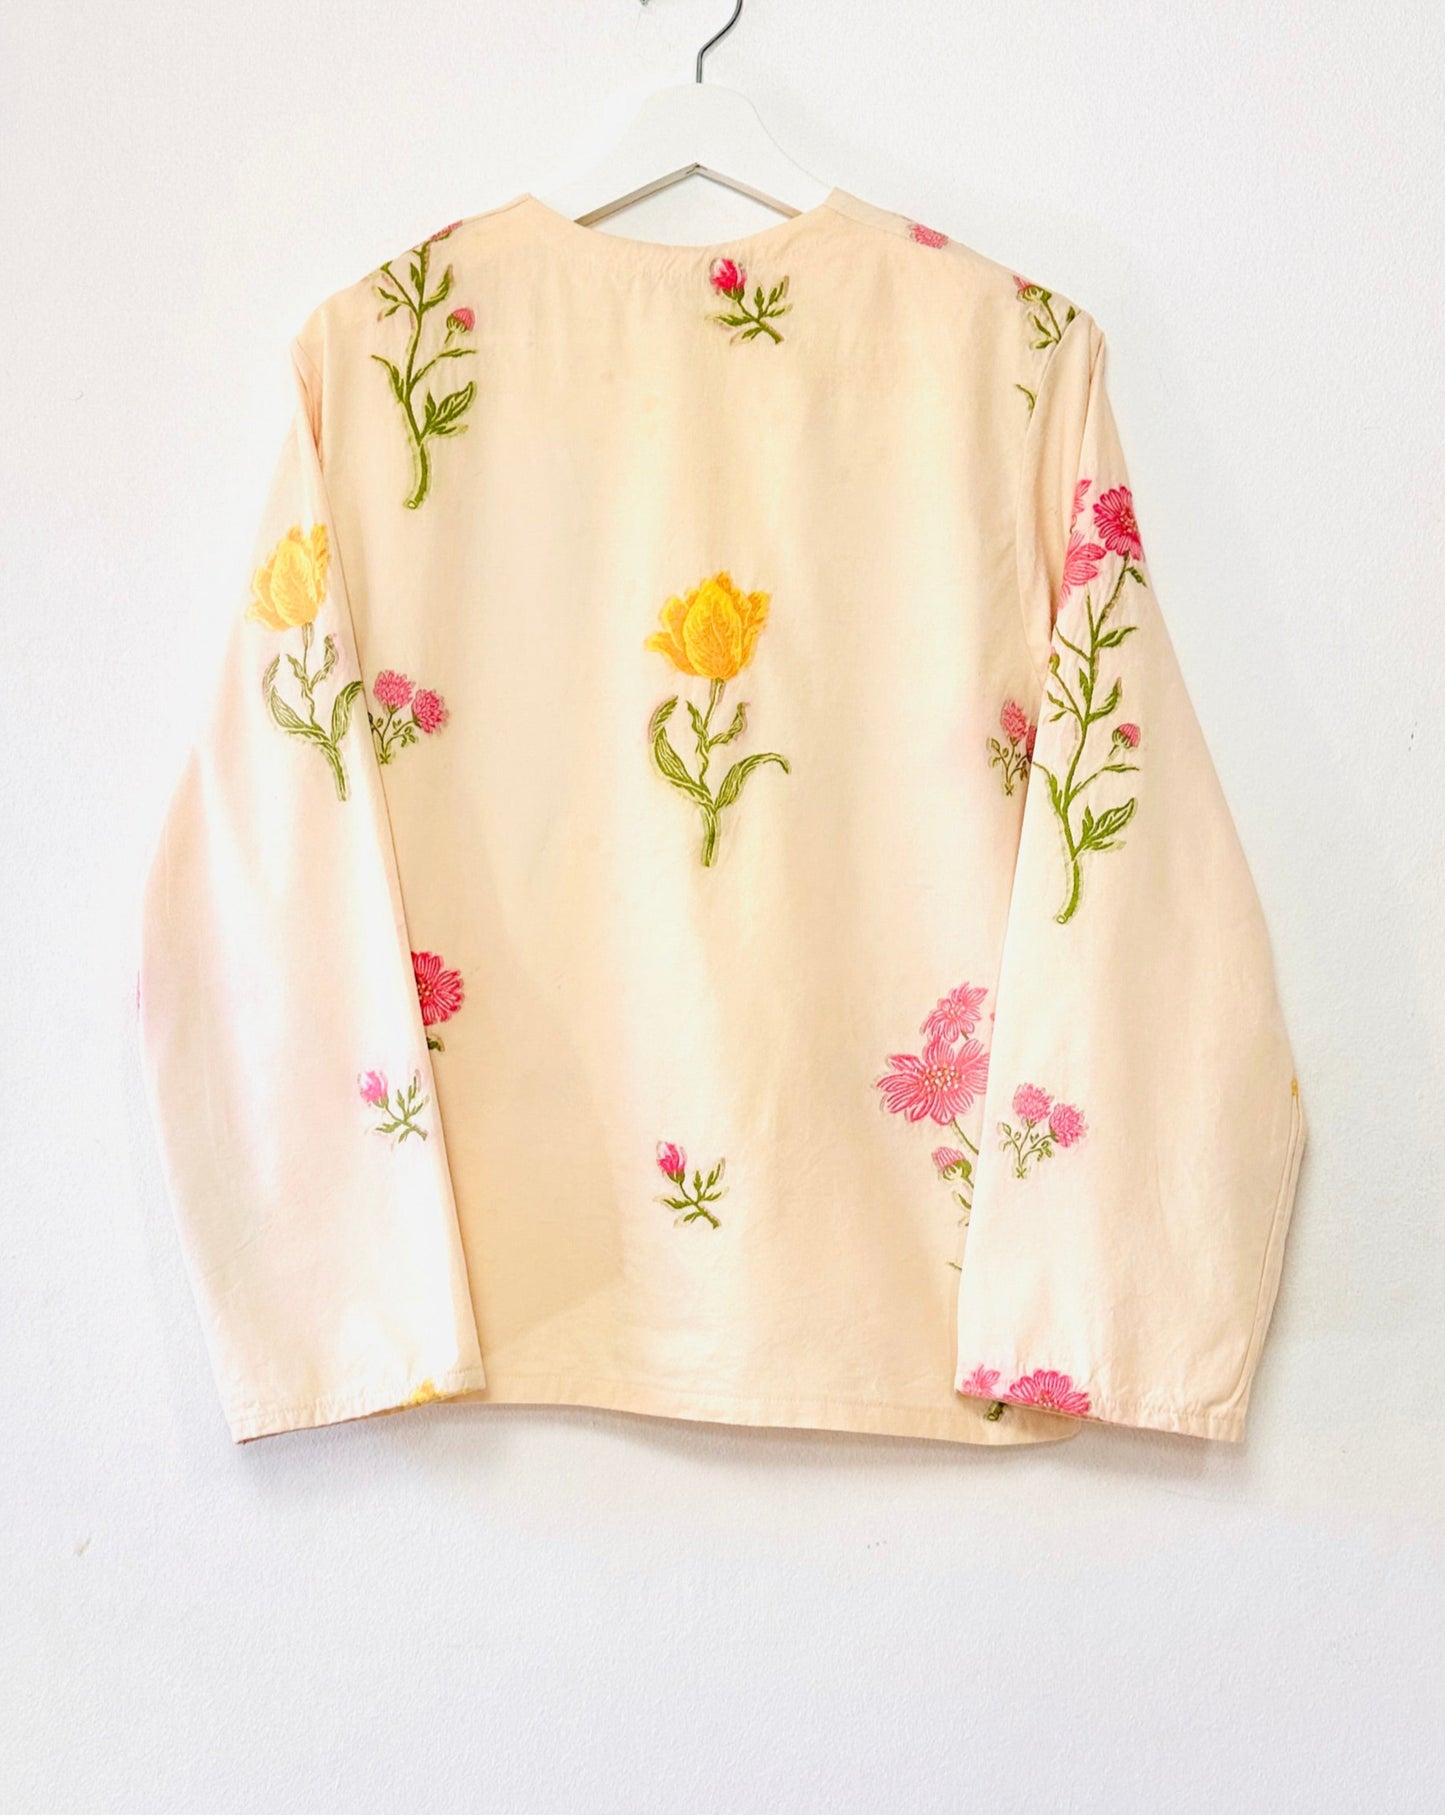 Lua hand embroidered jacket